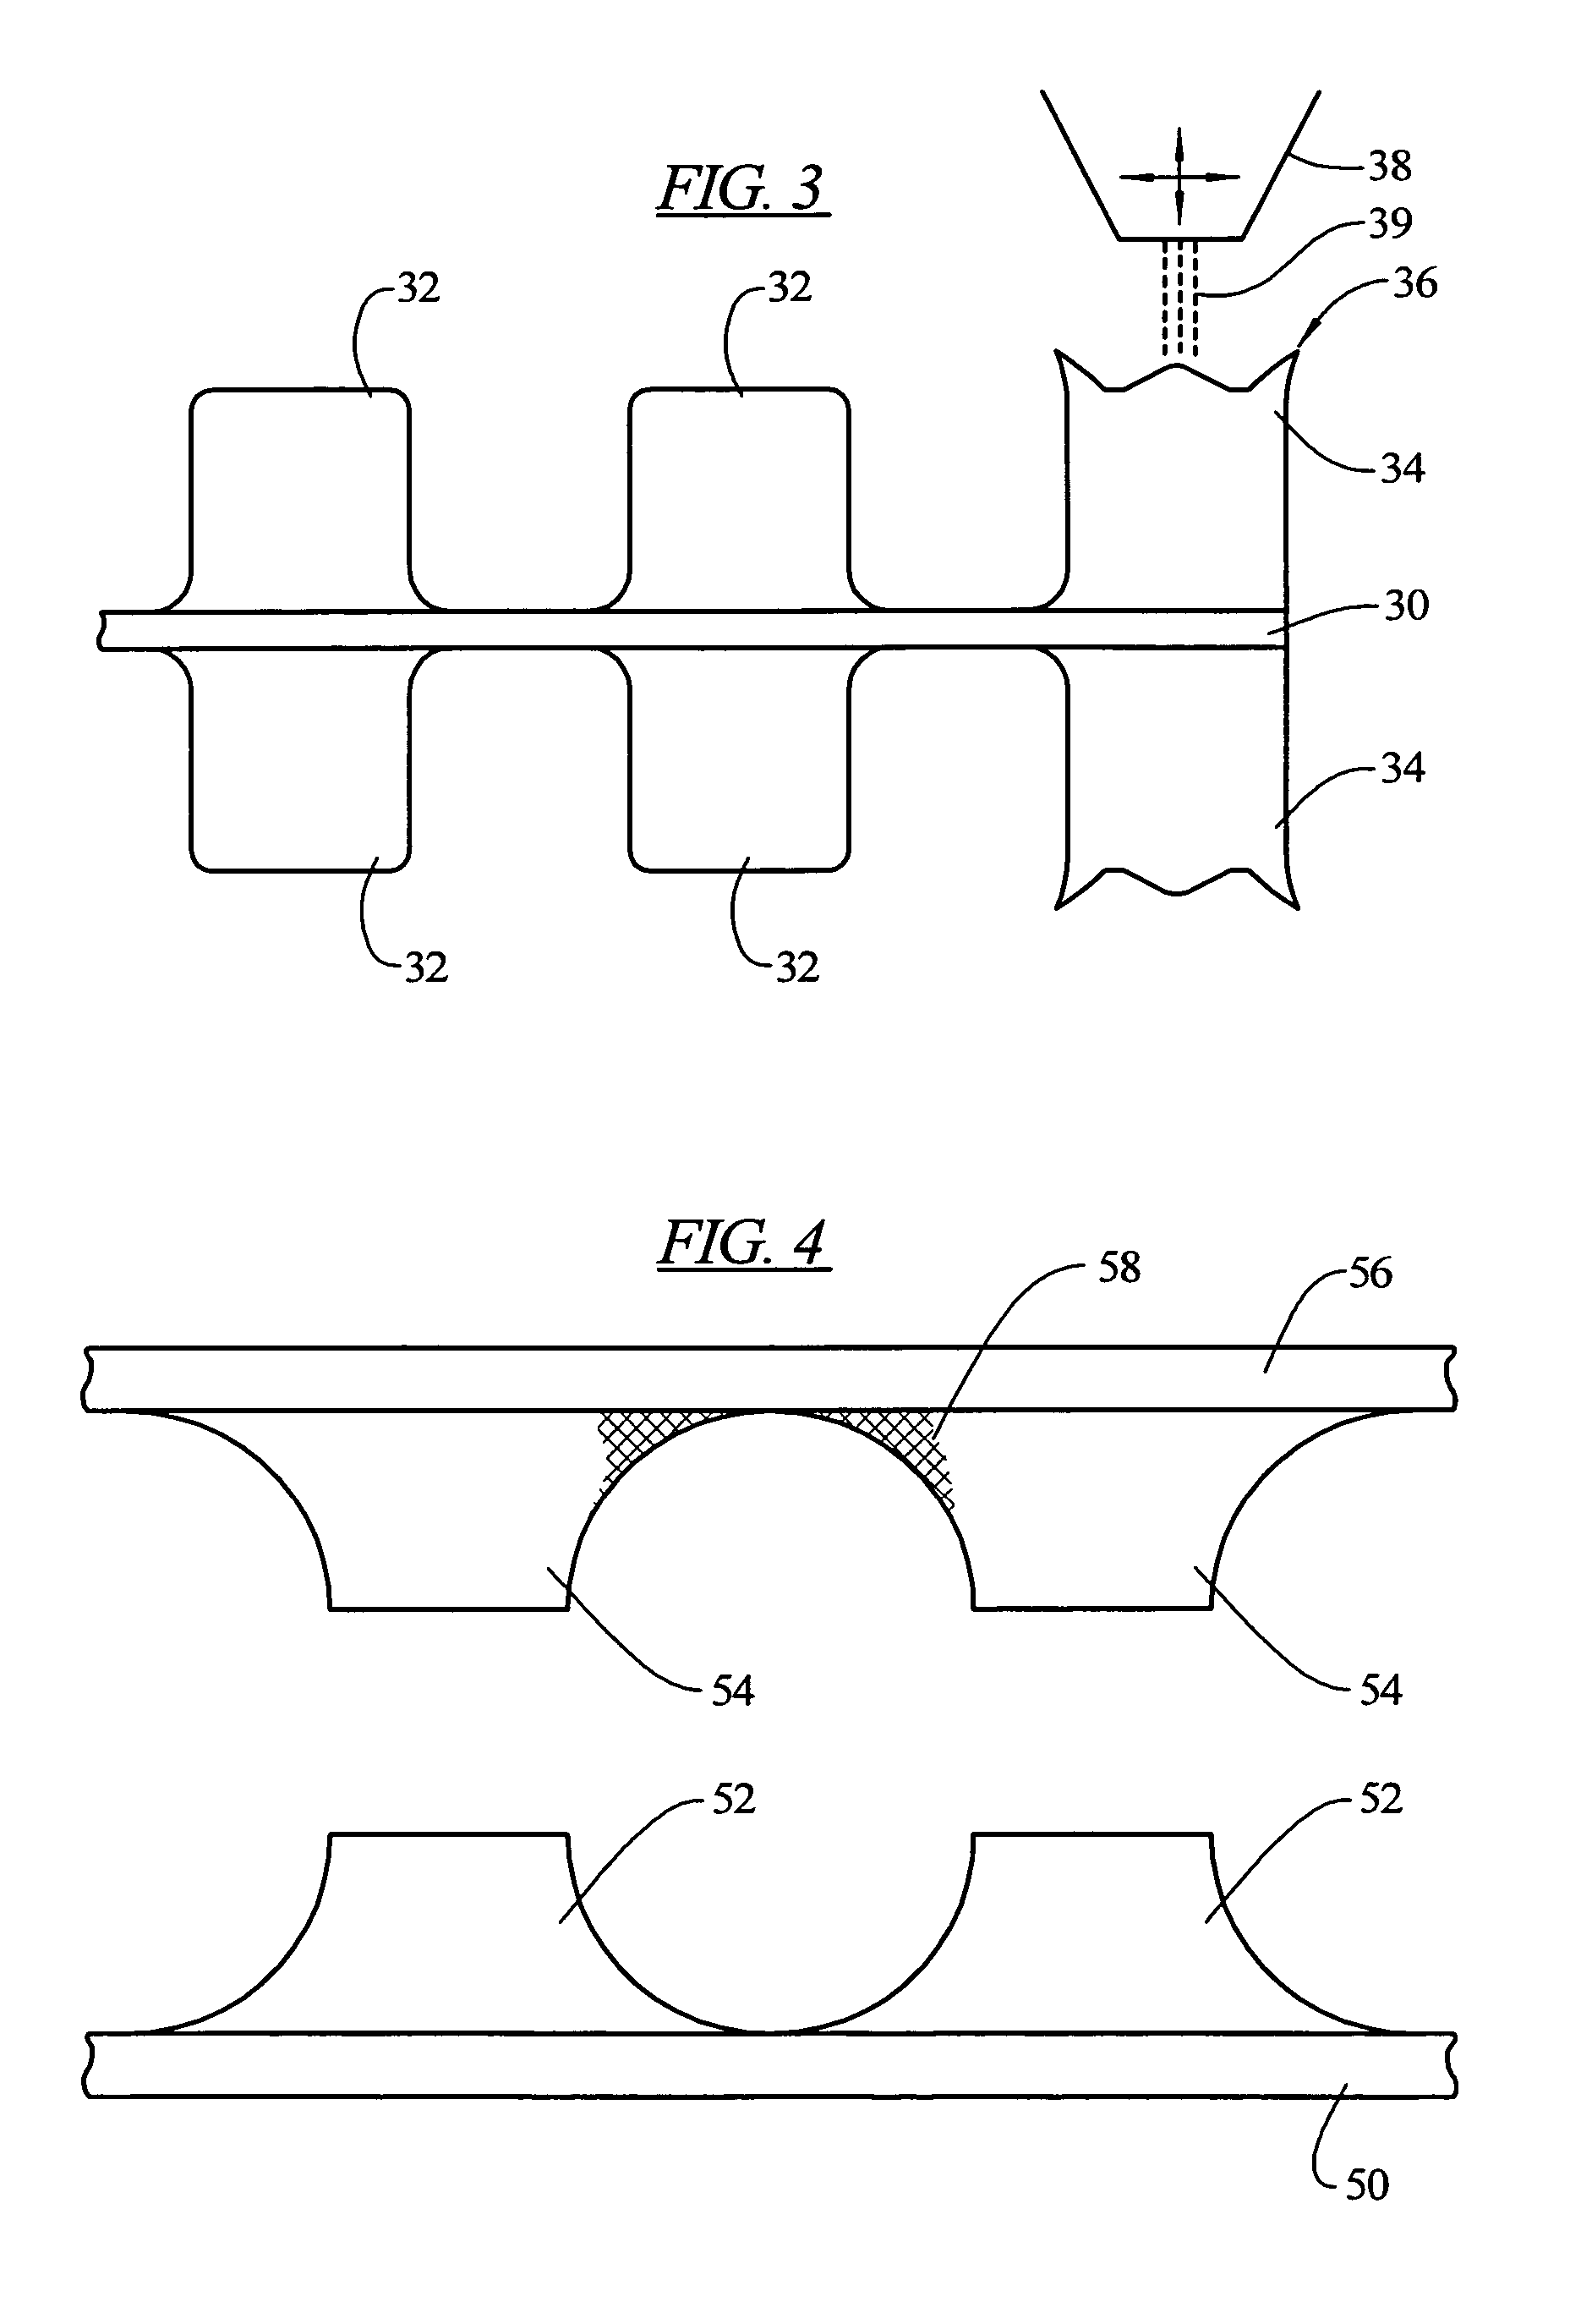 Methods for manufacturing electrochemical cell parts comprising material deposition processes